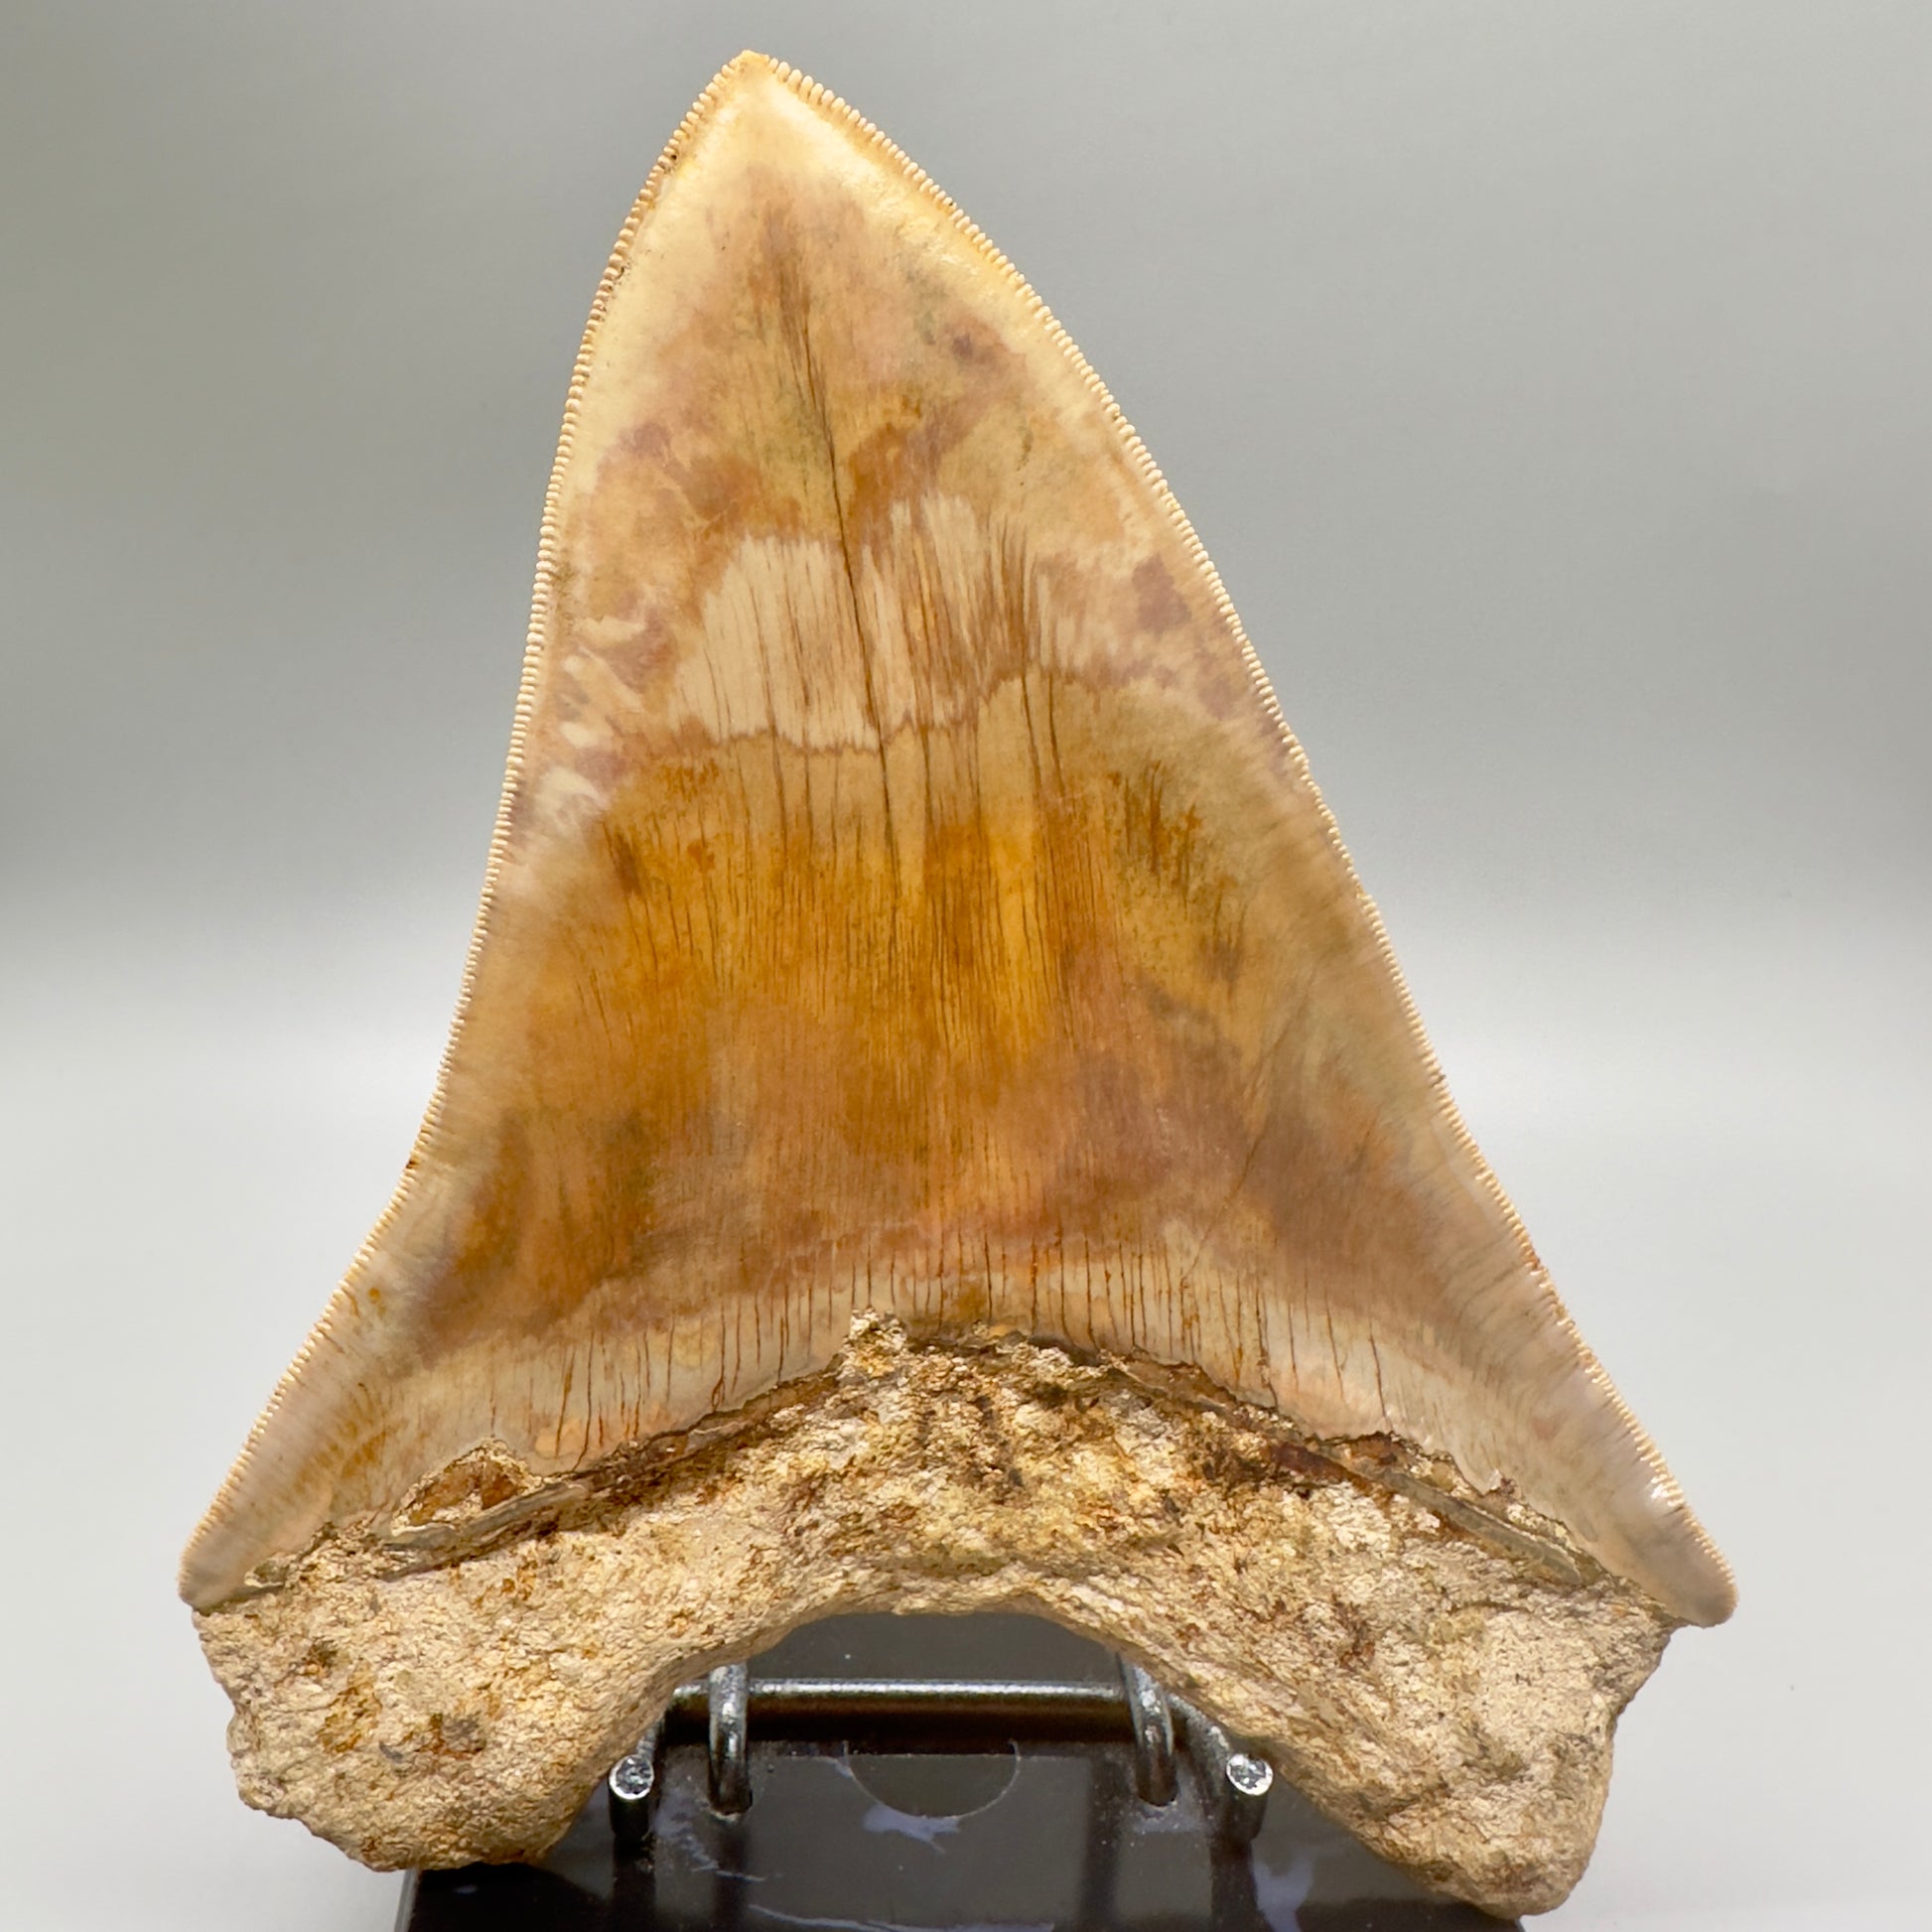 EXTRA LARGE 6.09" Fossil Monster Megalodon Tooth from Indonesia - Collector Quality CM4635 - Back